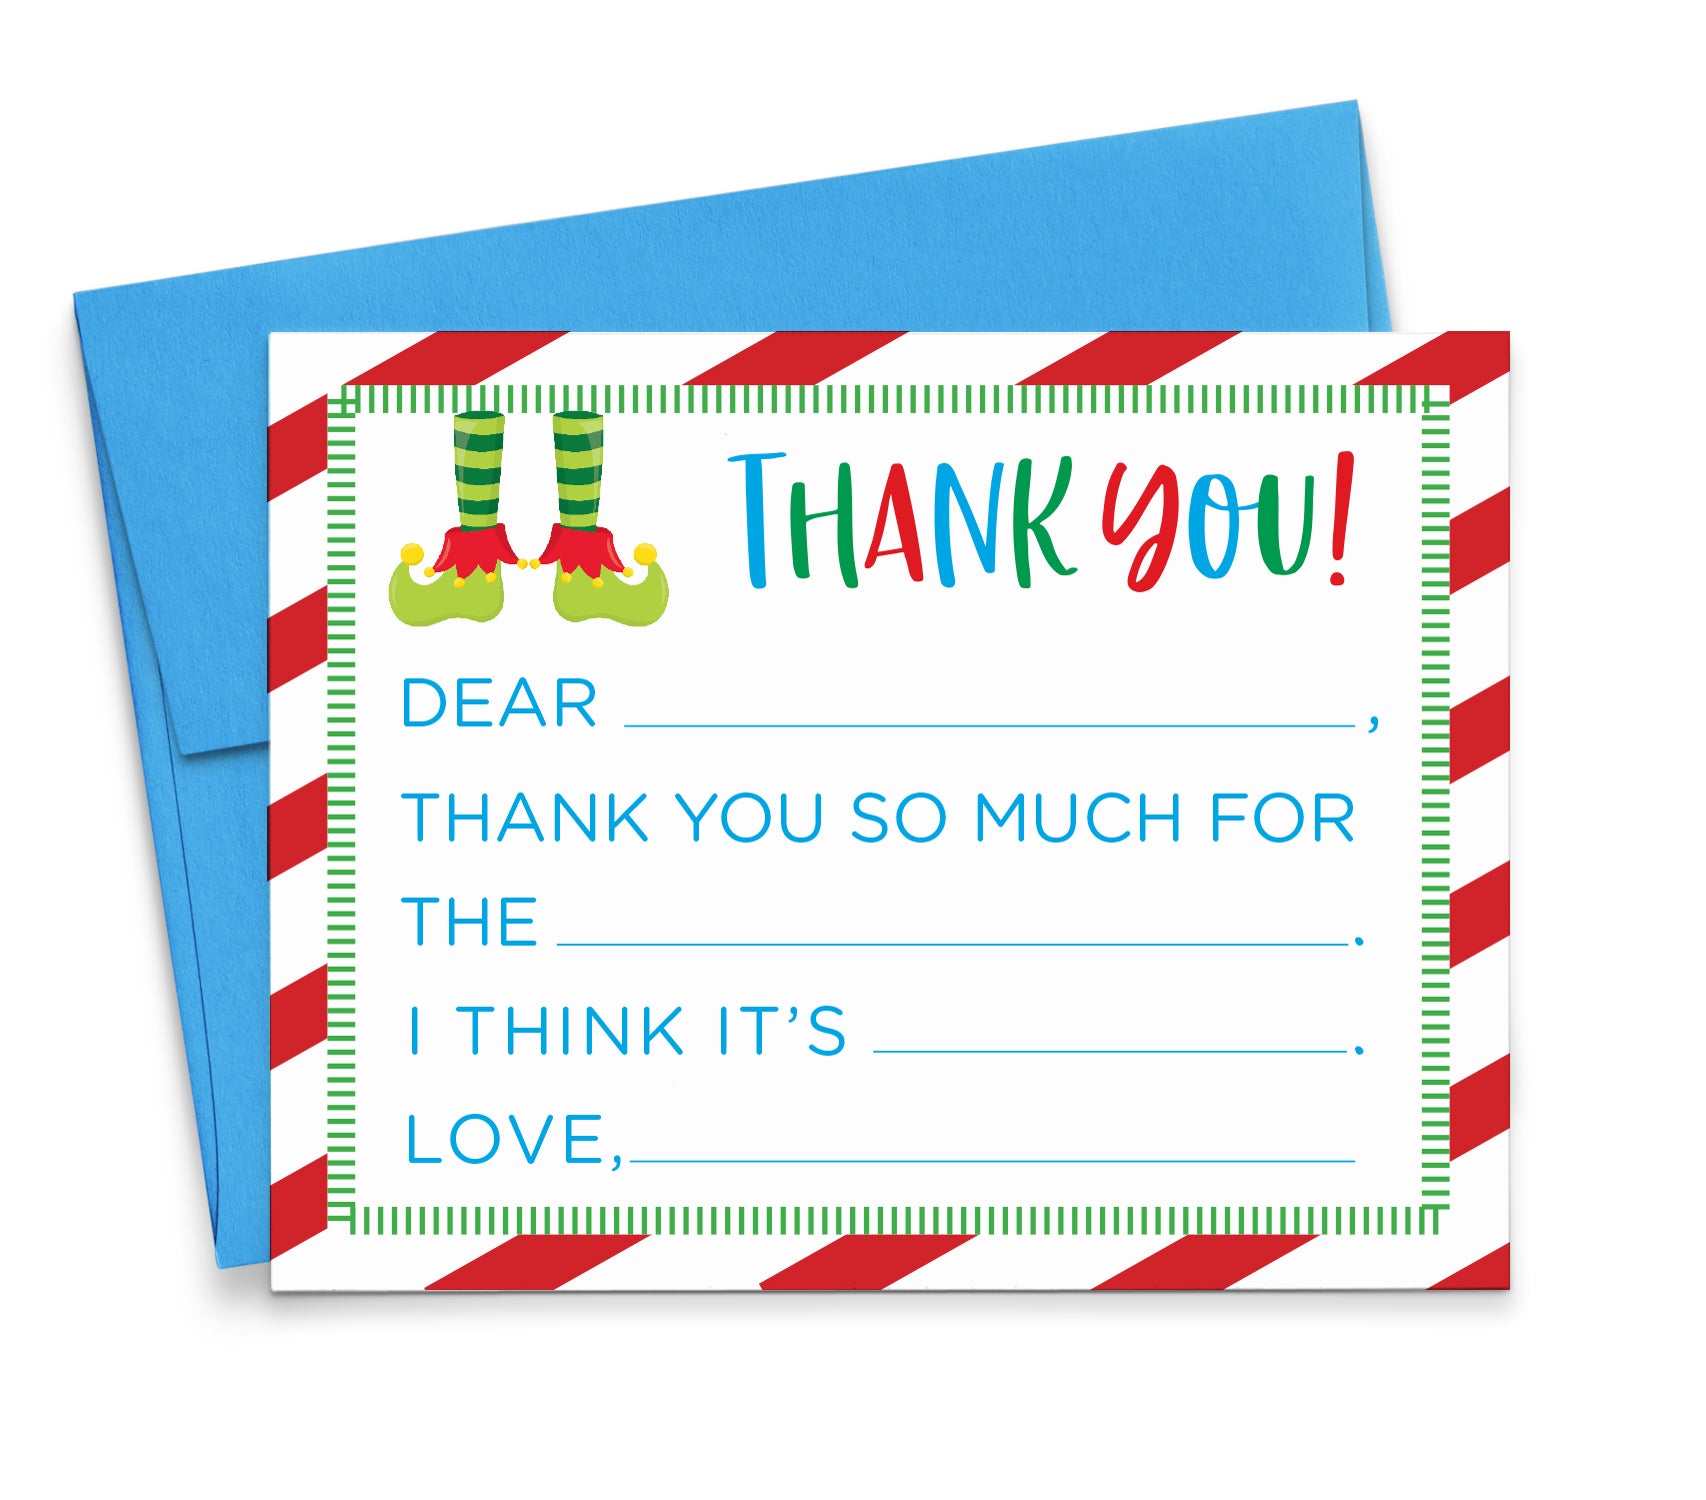    CS008 Elf Christmas Fill In Cards with Border candy cane holiday xmas thank you